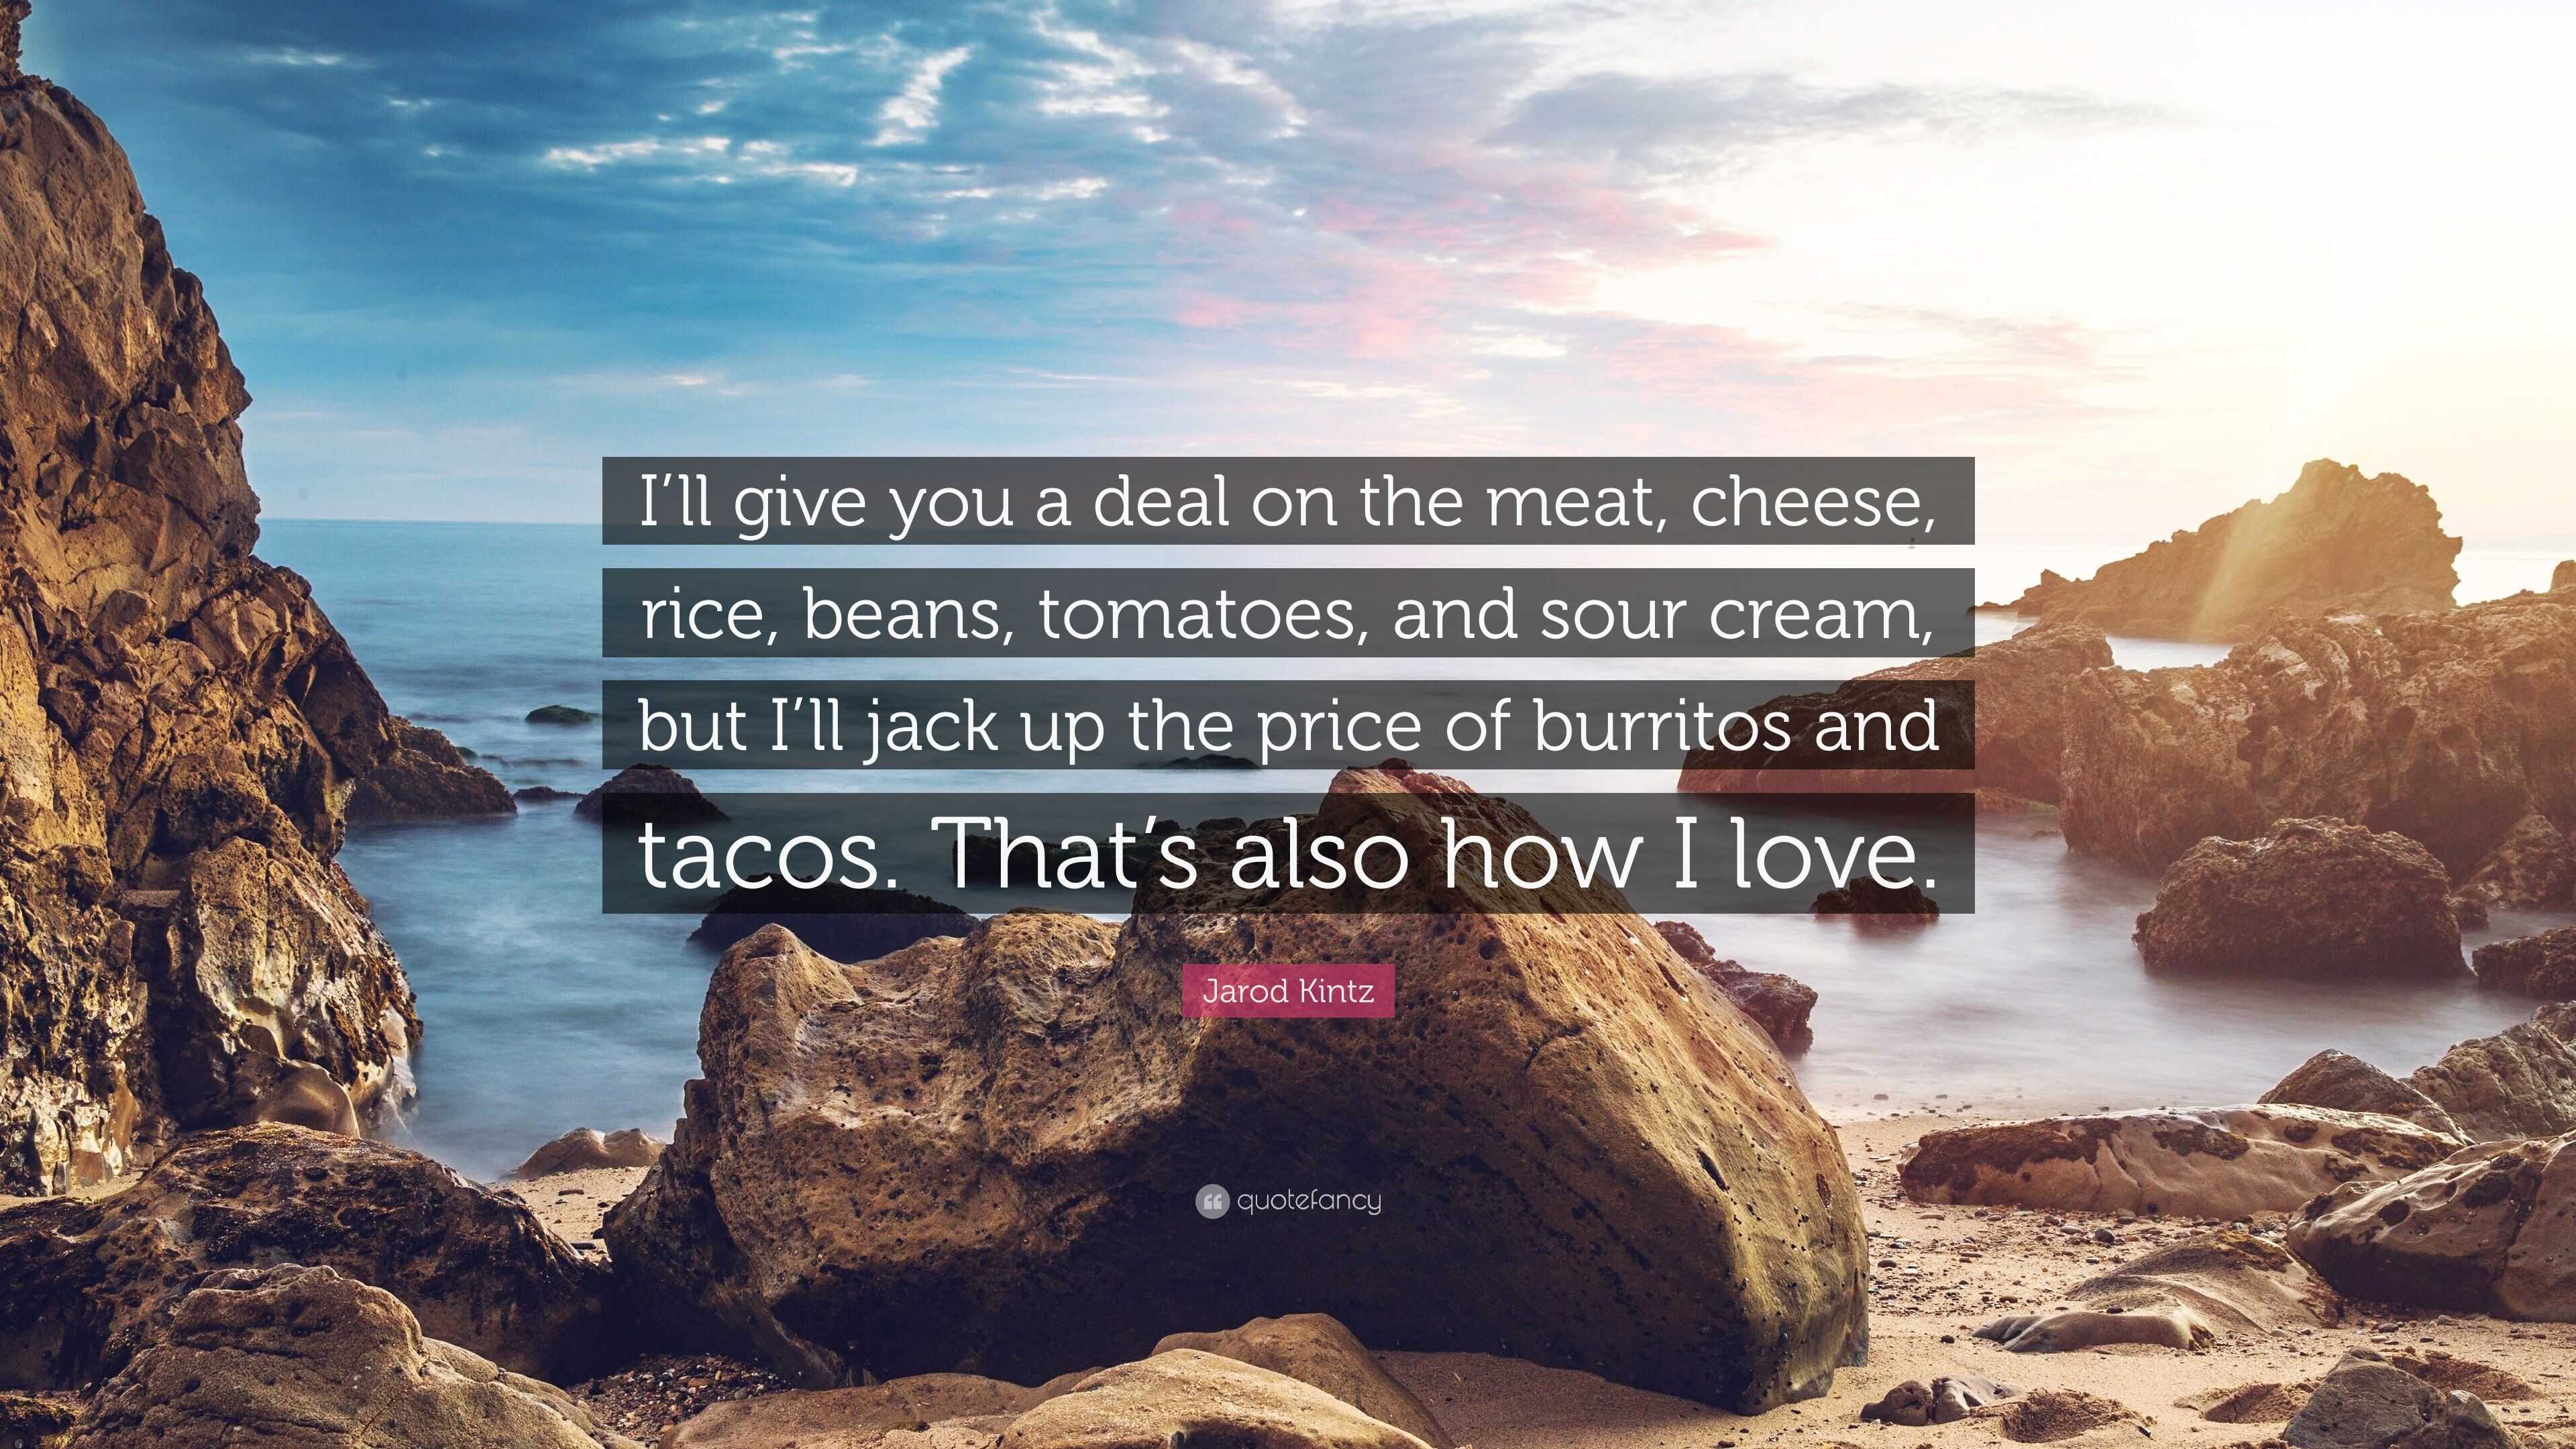 https://quotefancy.com/media/wallpaper/3840x2160/6025552-Jarod-Kintz-Quote-I-ll-give-you-a-deal-on-the-meat-cheese-rice.jpg